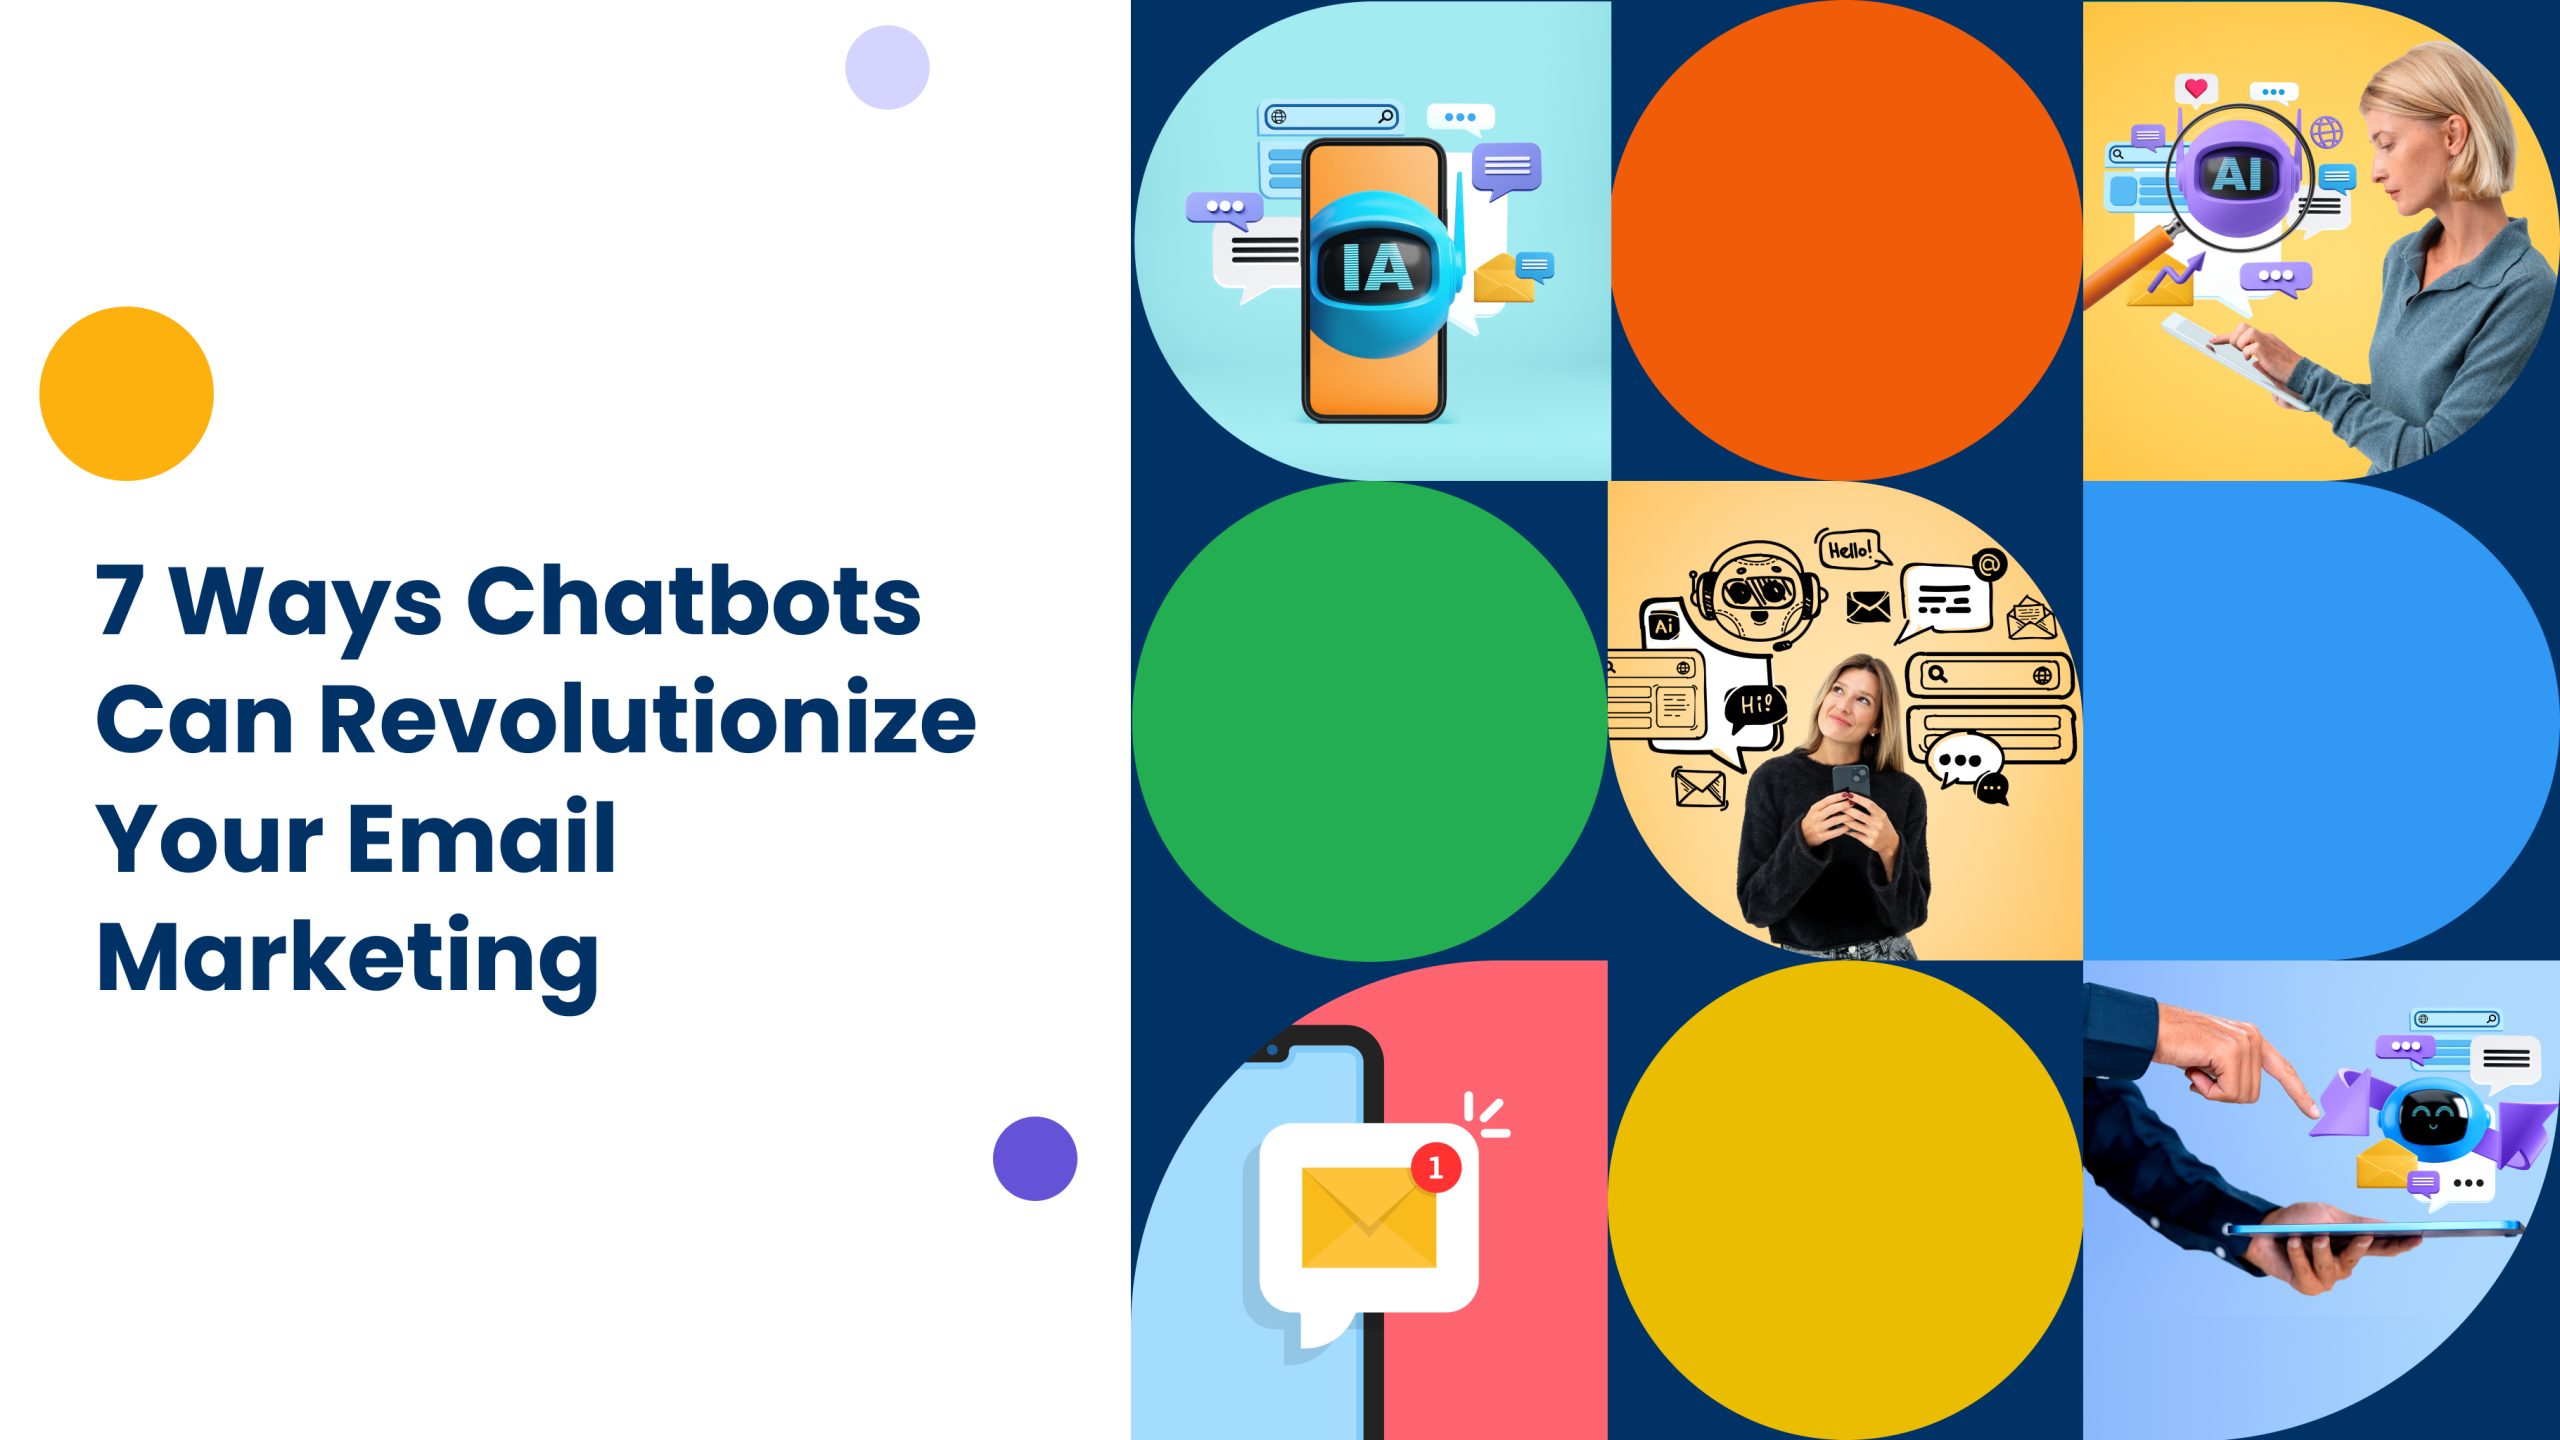 7 Ways Chatbots Can Revolutionize Your Email Marketing